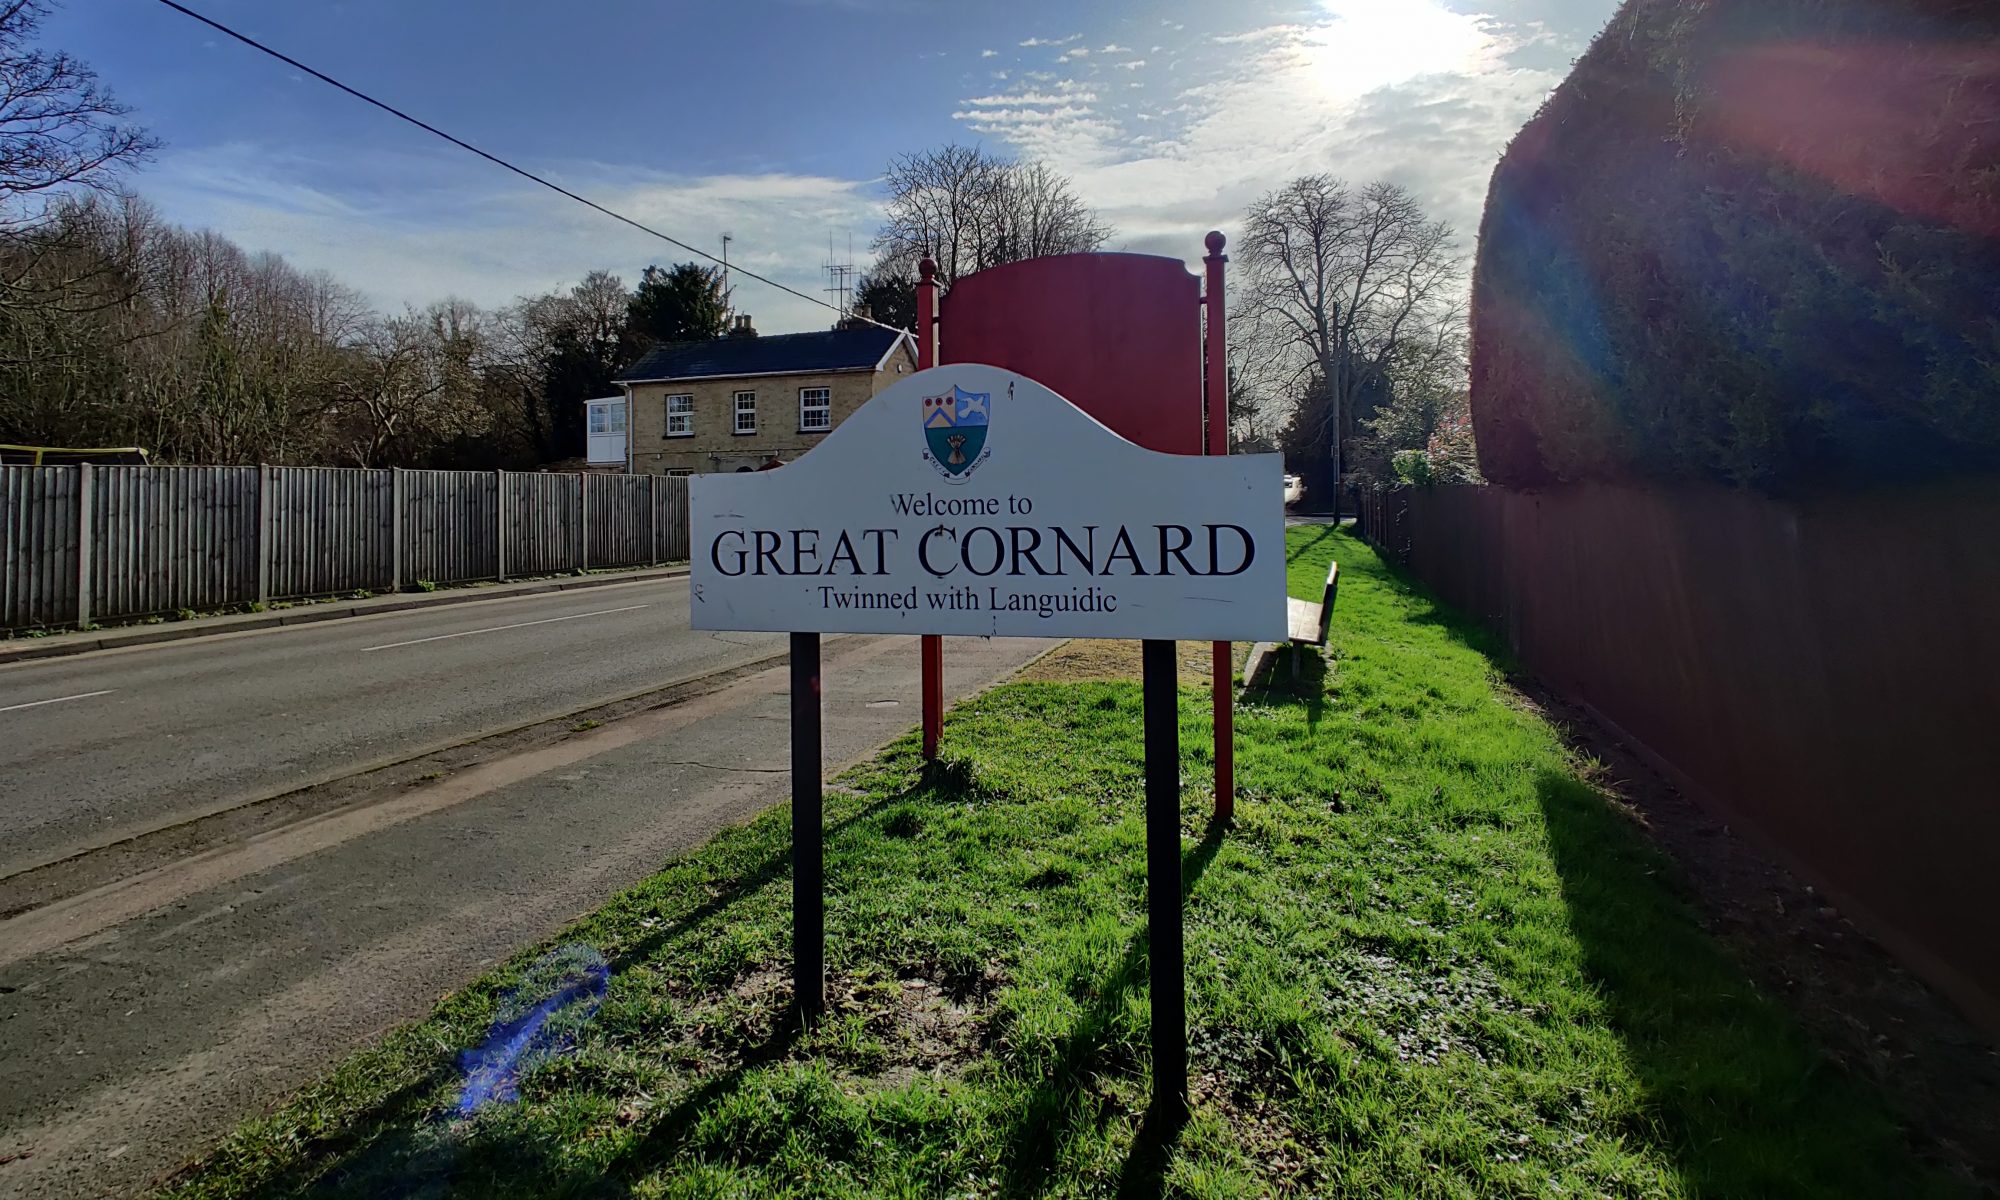 A sign saying "Welcome to Great Cornard"